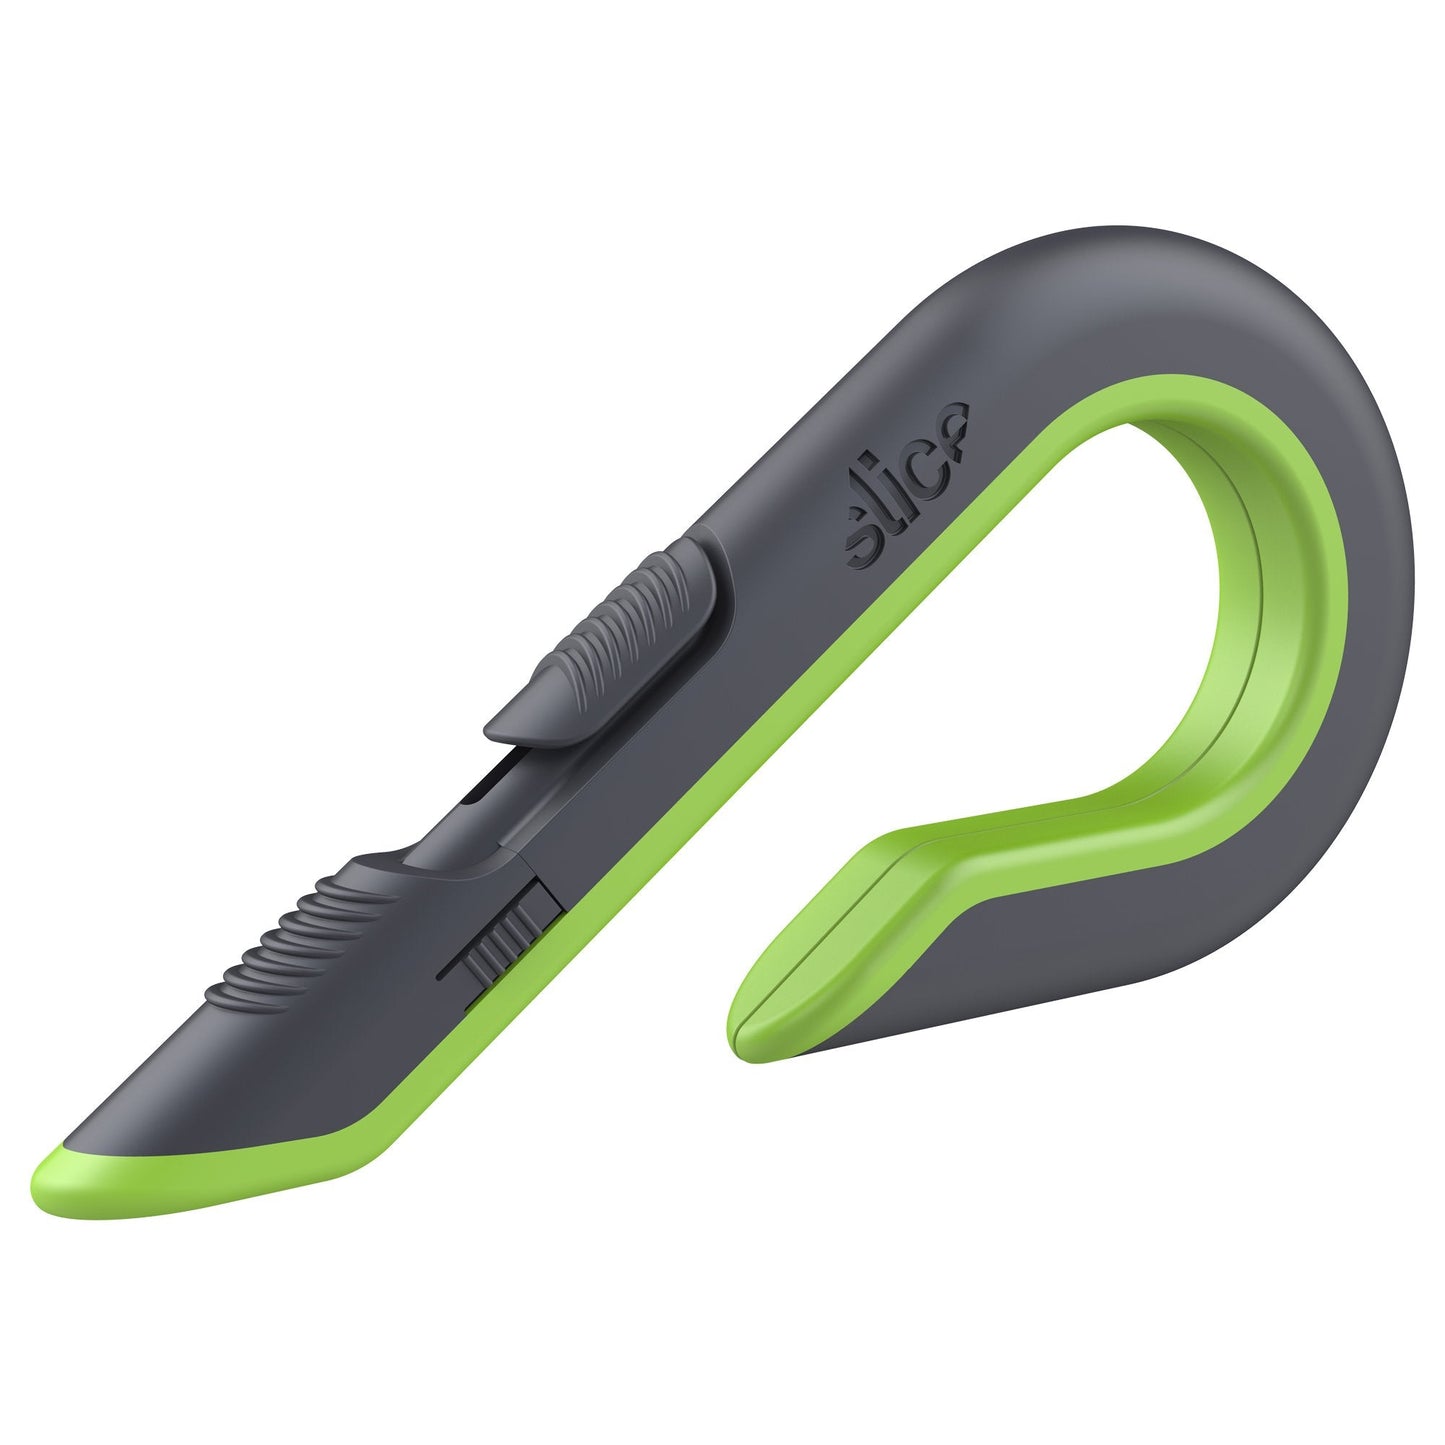 The Slice® 10503 Auto-Retractable Box Cutter with safety blade